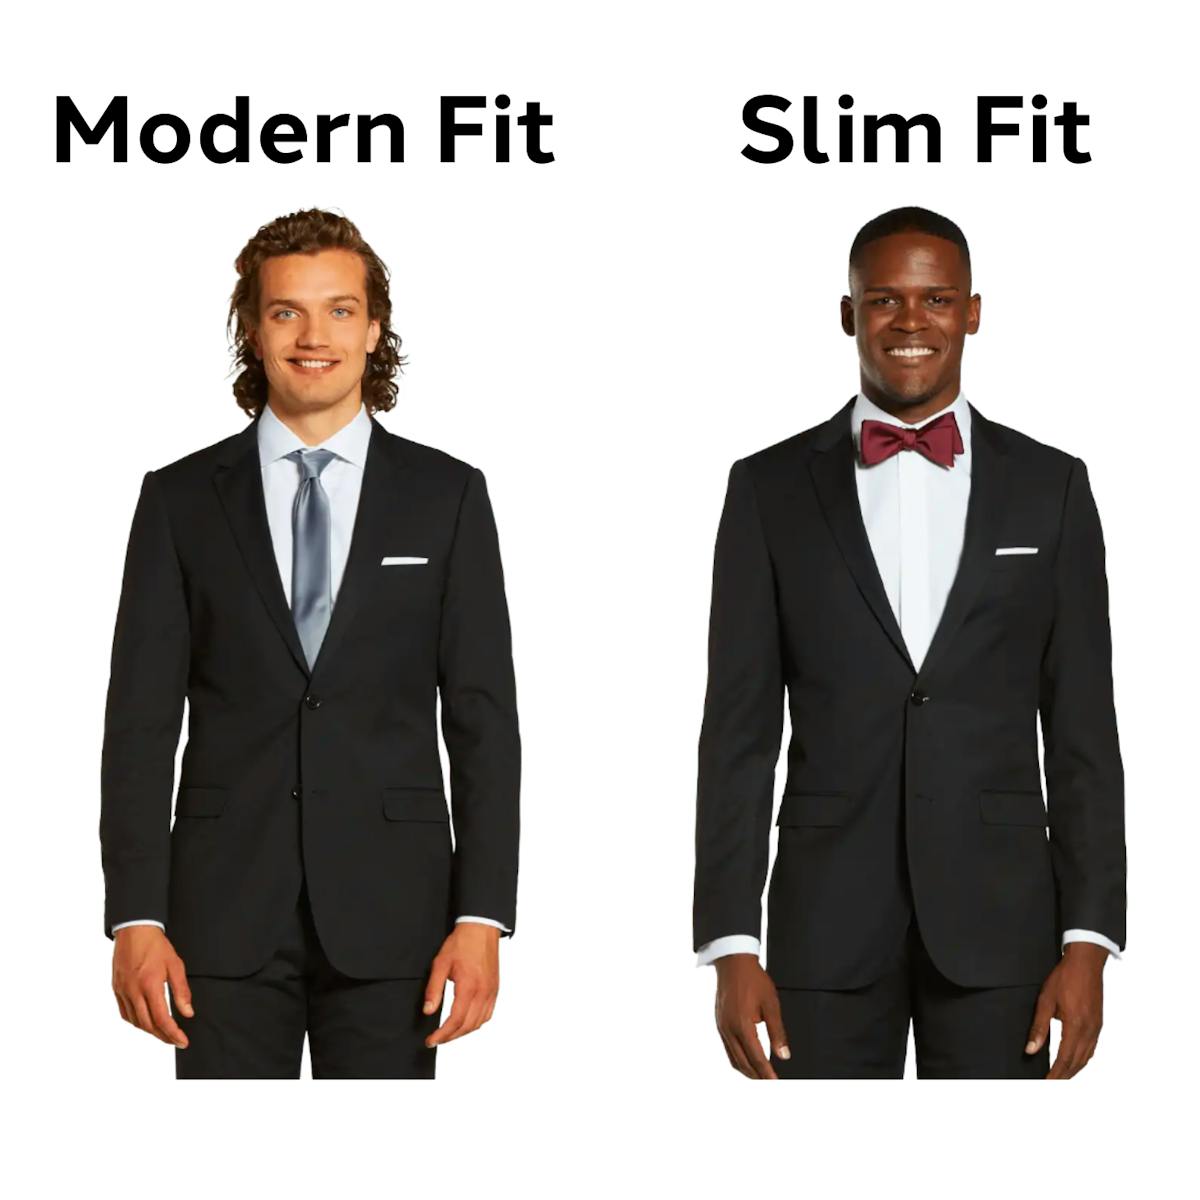 Custom Fit vs Slim Fit - What's The Difference?